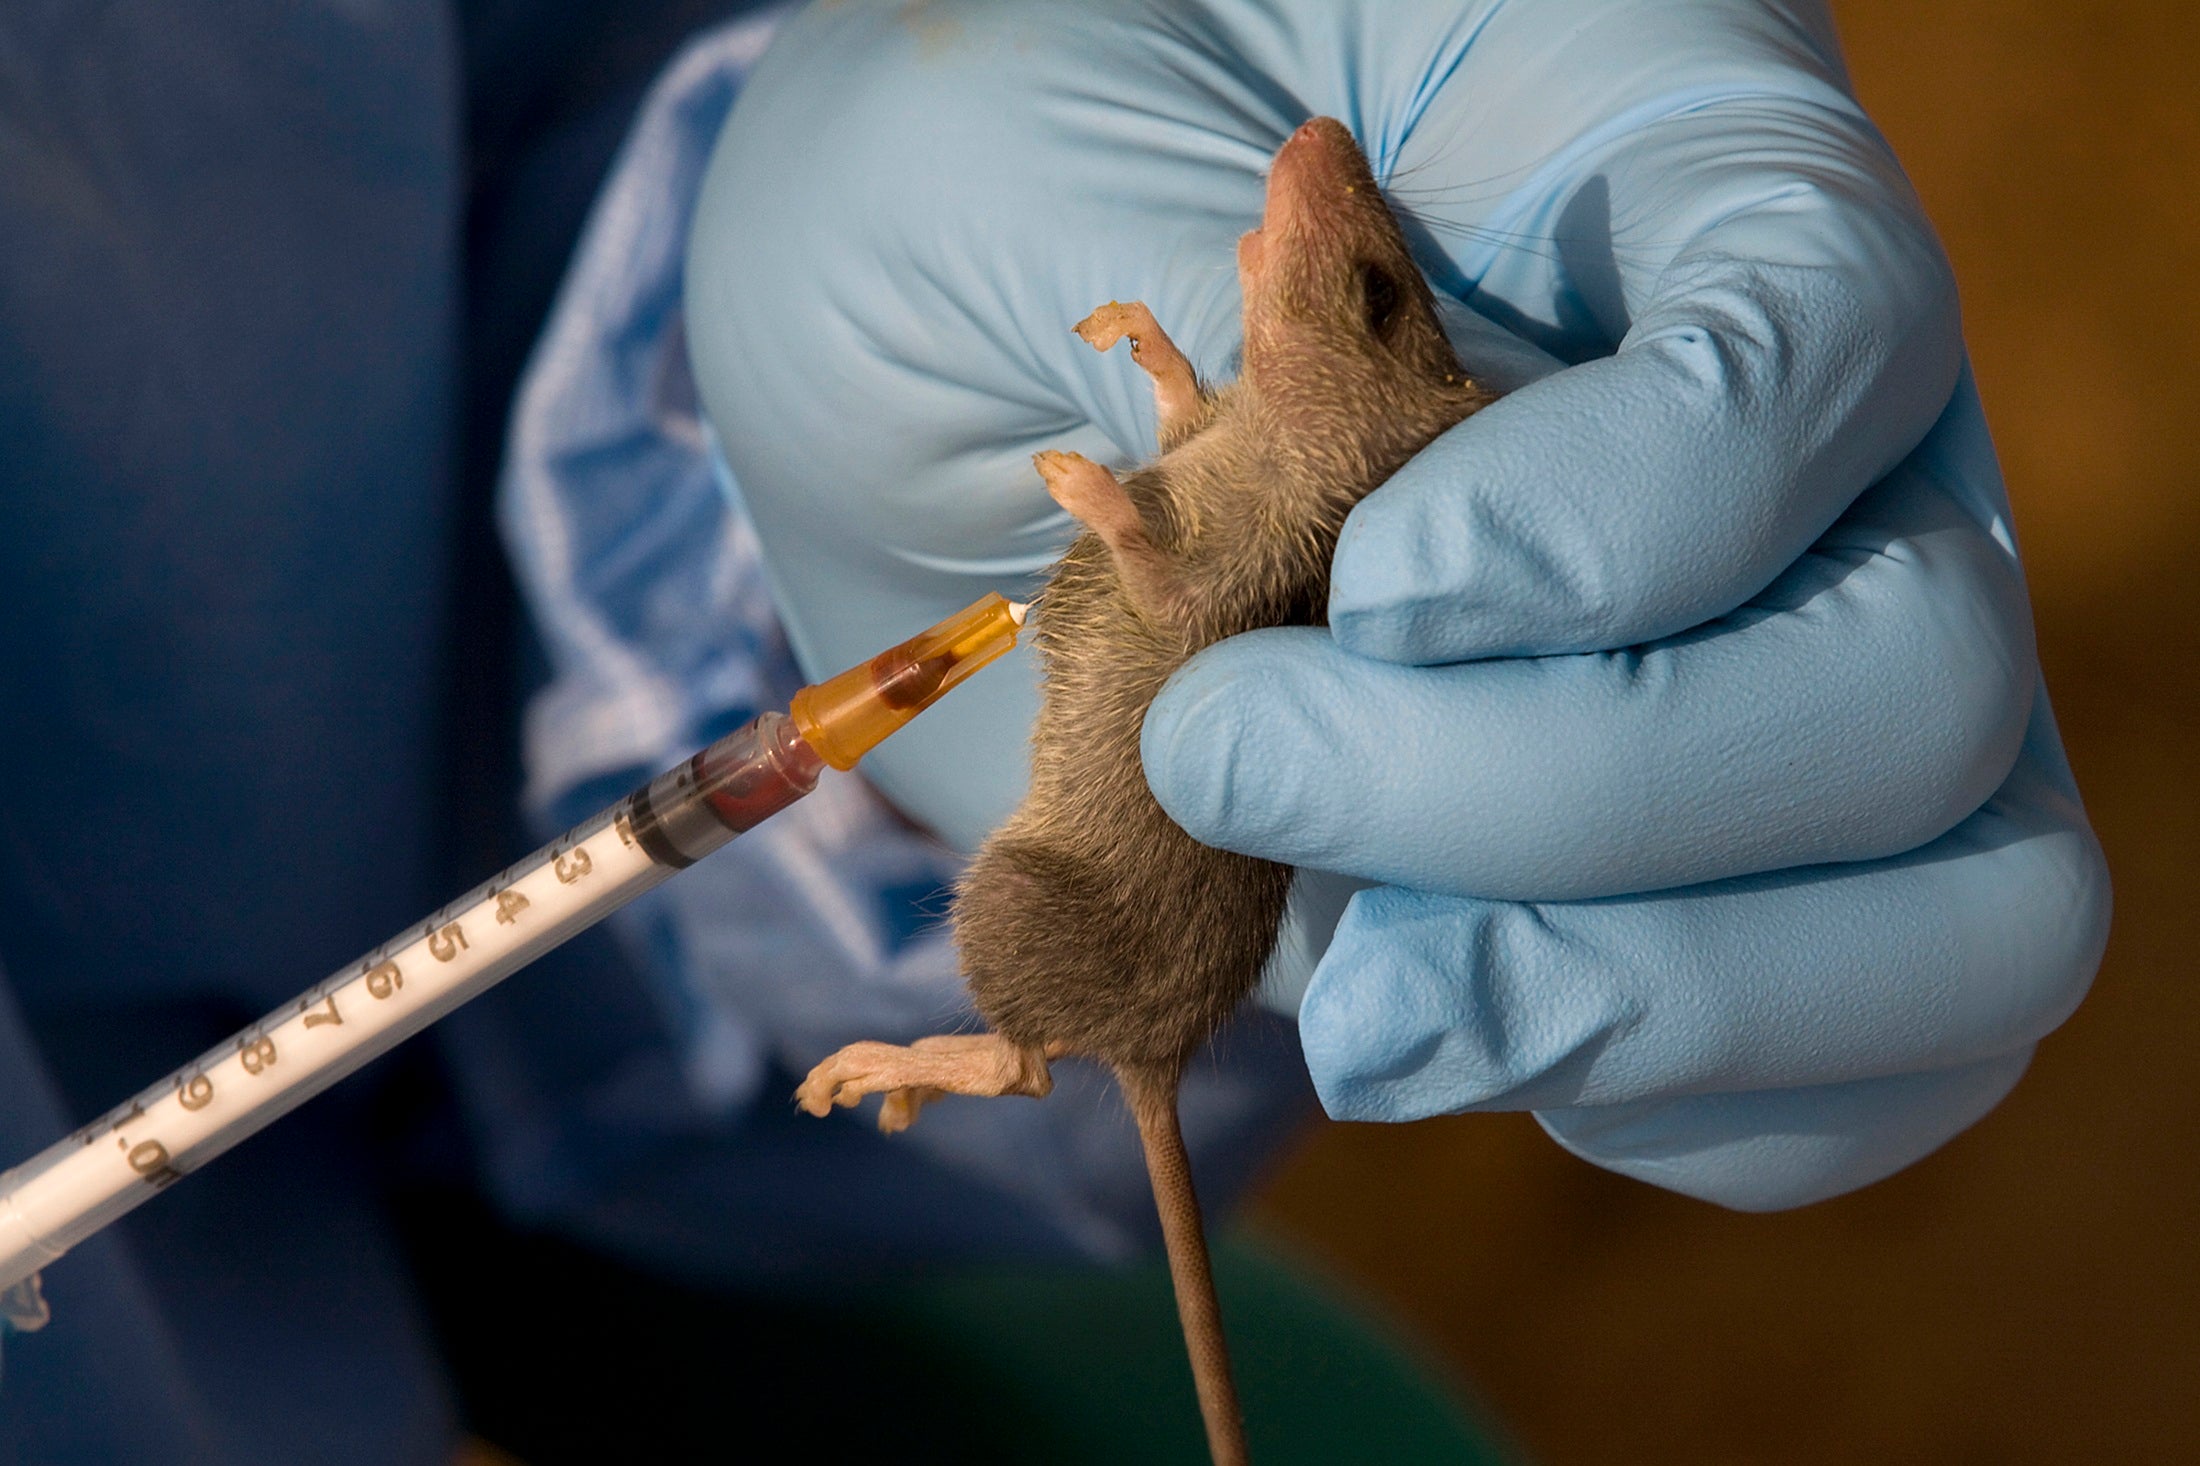 Lassa fever is among a US list of ‘category A’ diseases, deemed to have the potential for major public health impact, alongside anthrax and botulism